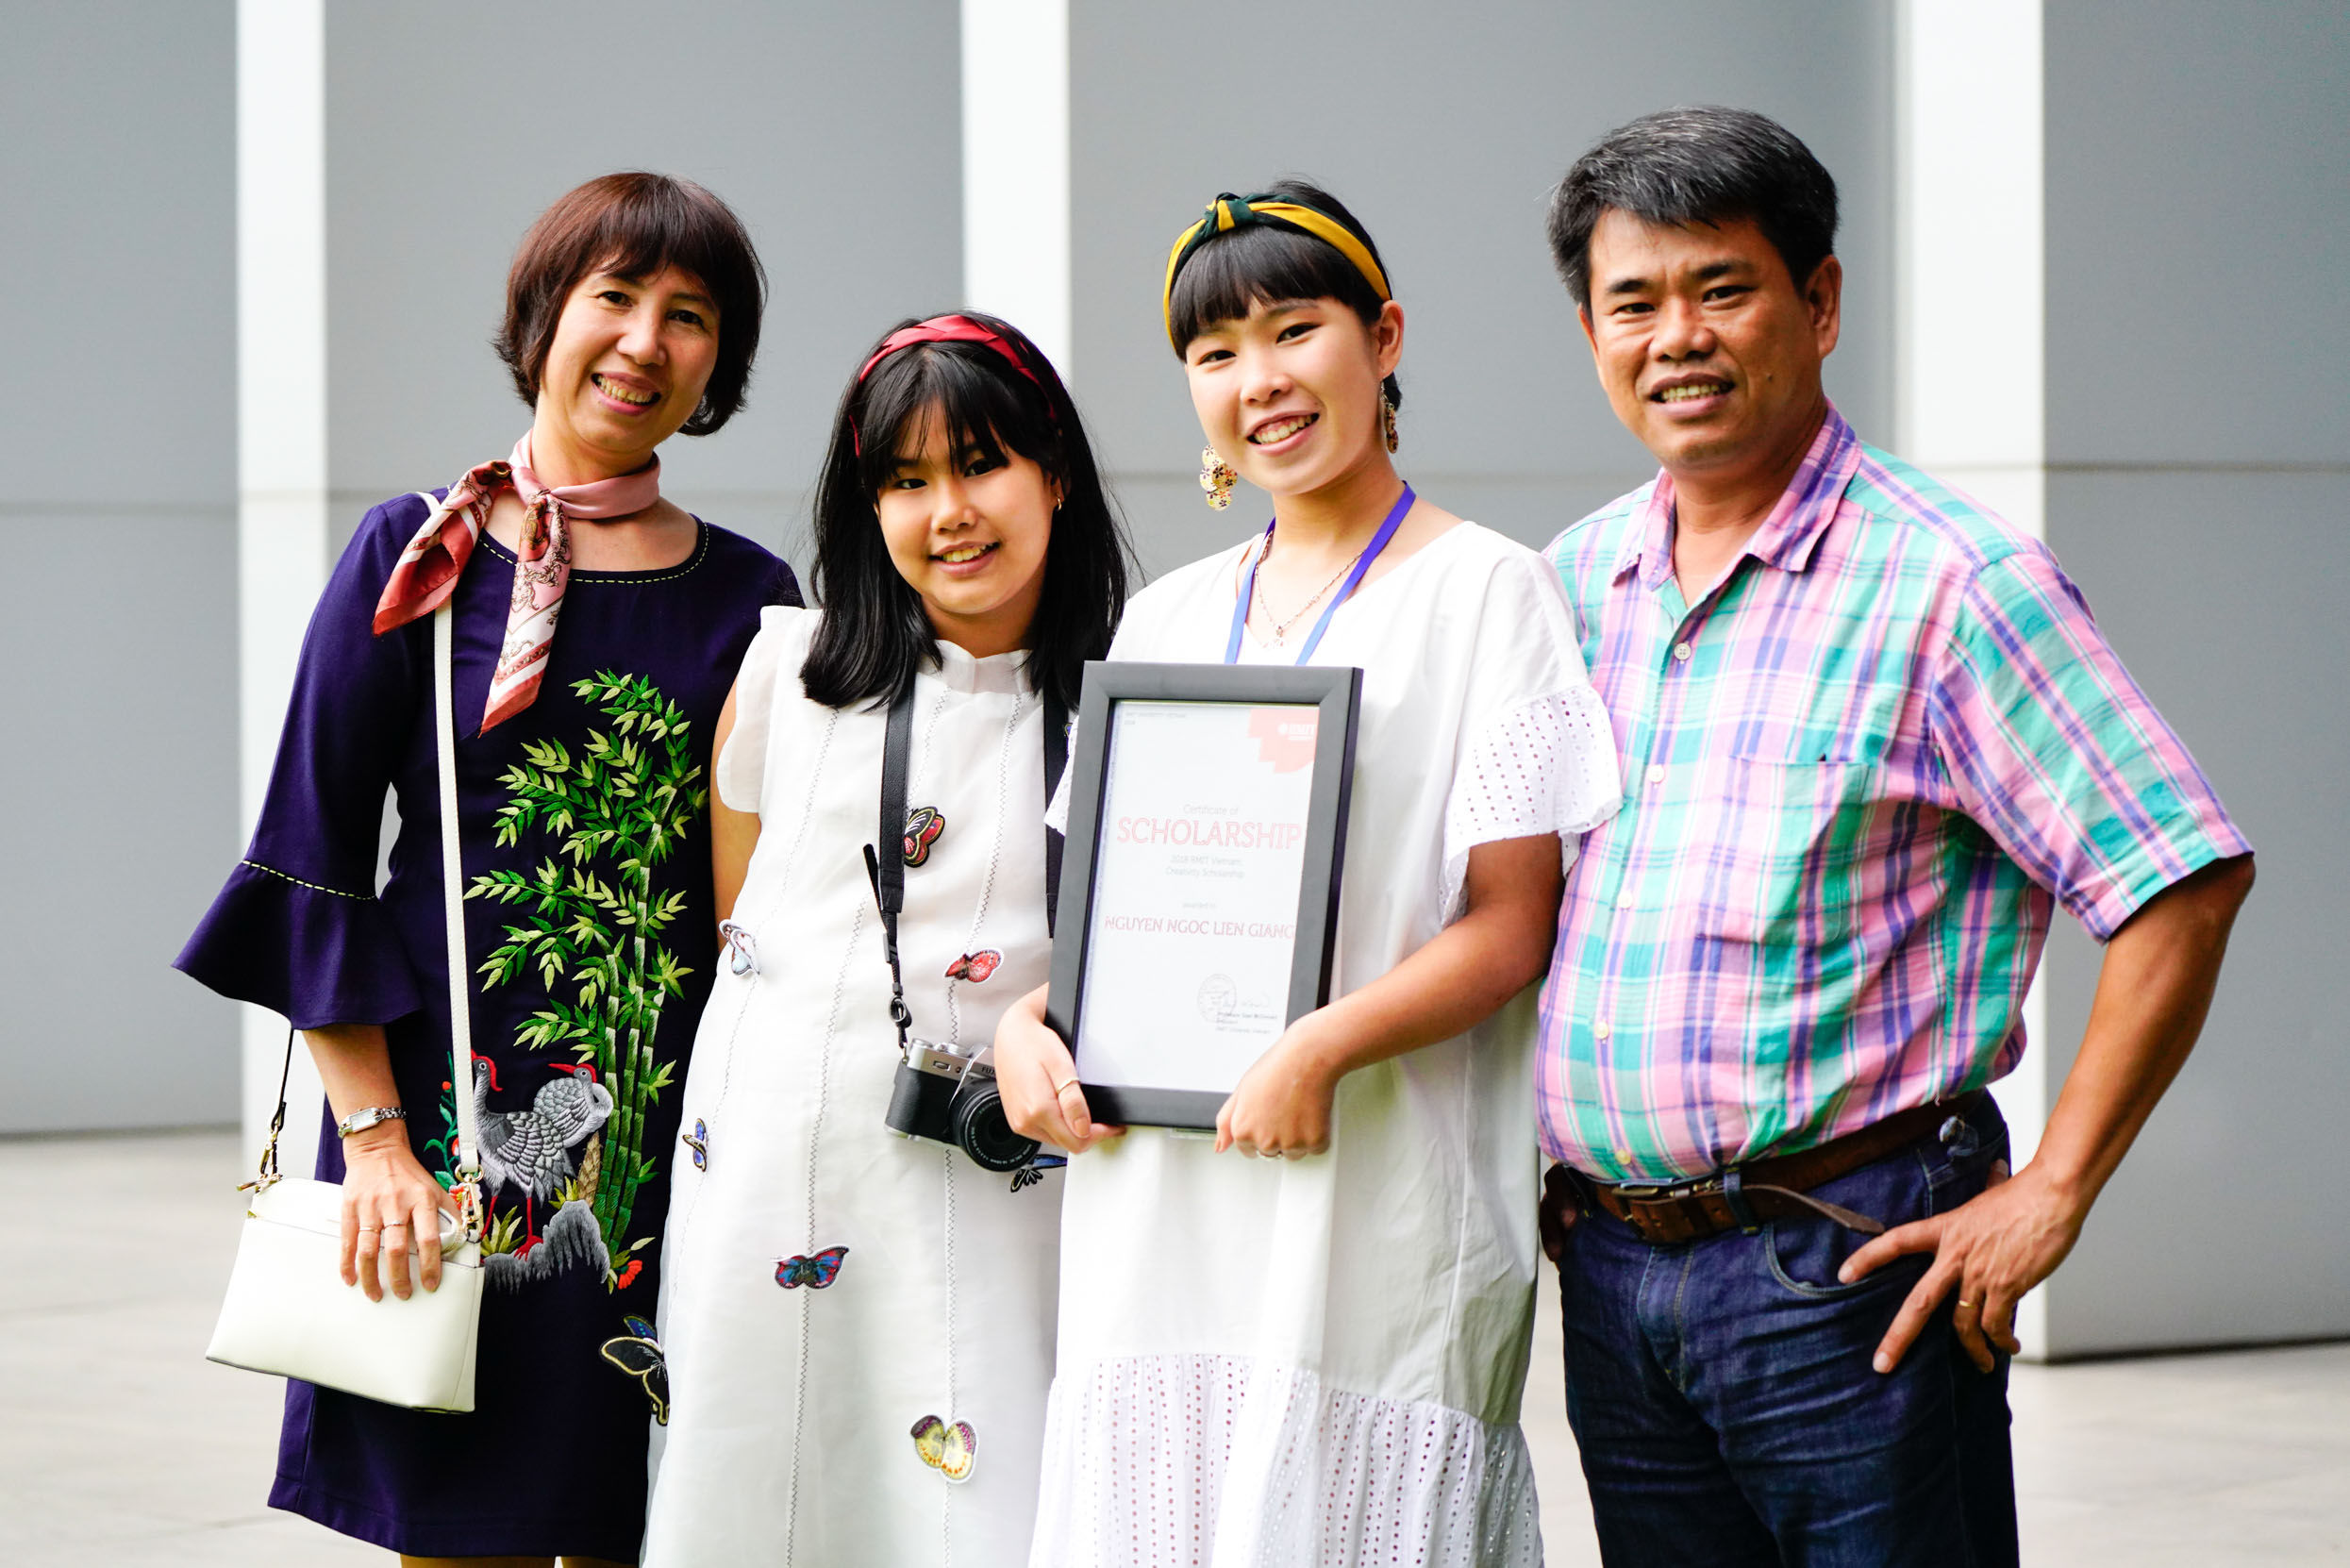 Lien Giang with her family, after accepting the RMIT Creativity Scholarship at the Scholarship Presentation Ceremony.